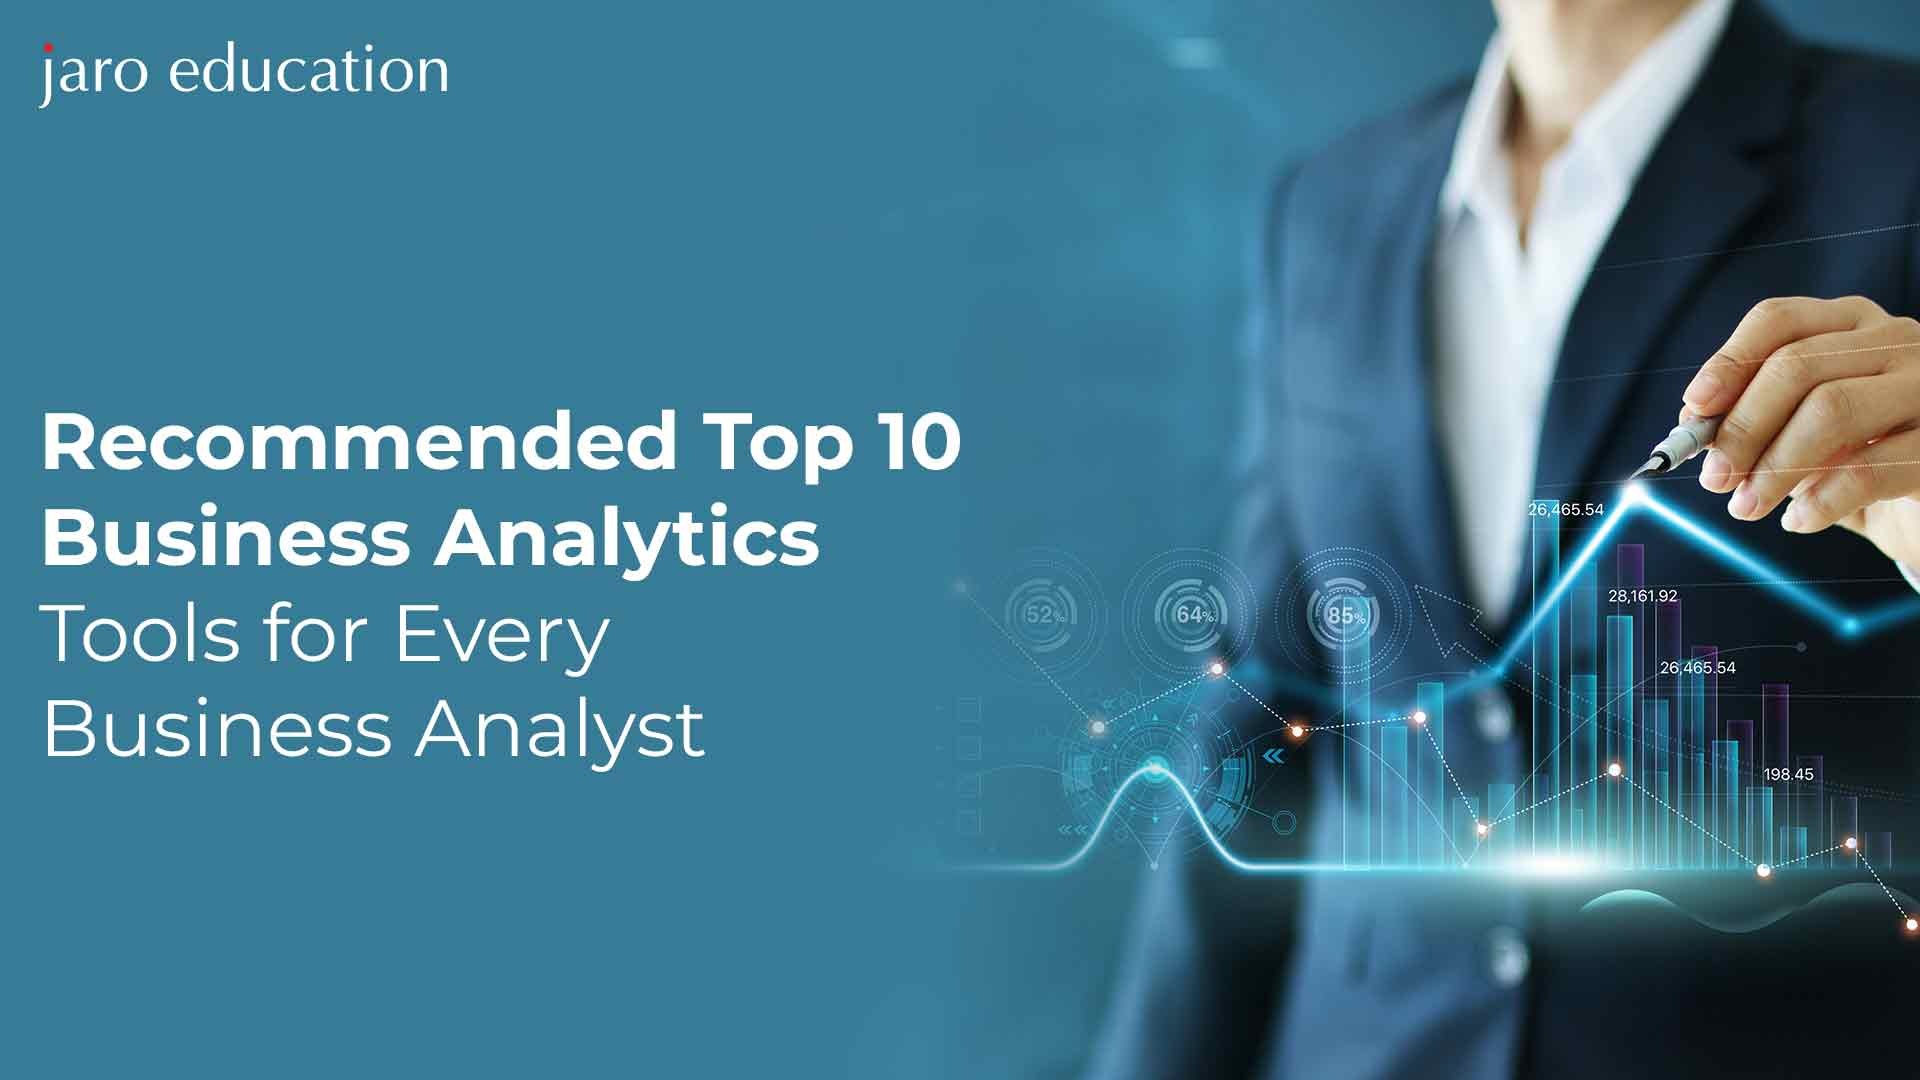 Recommended-Top-10-Business-Analytics-Tools-for-Every-Business-Analyst_36_11zon jaro